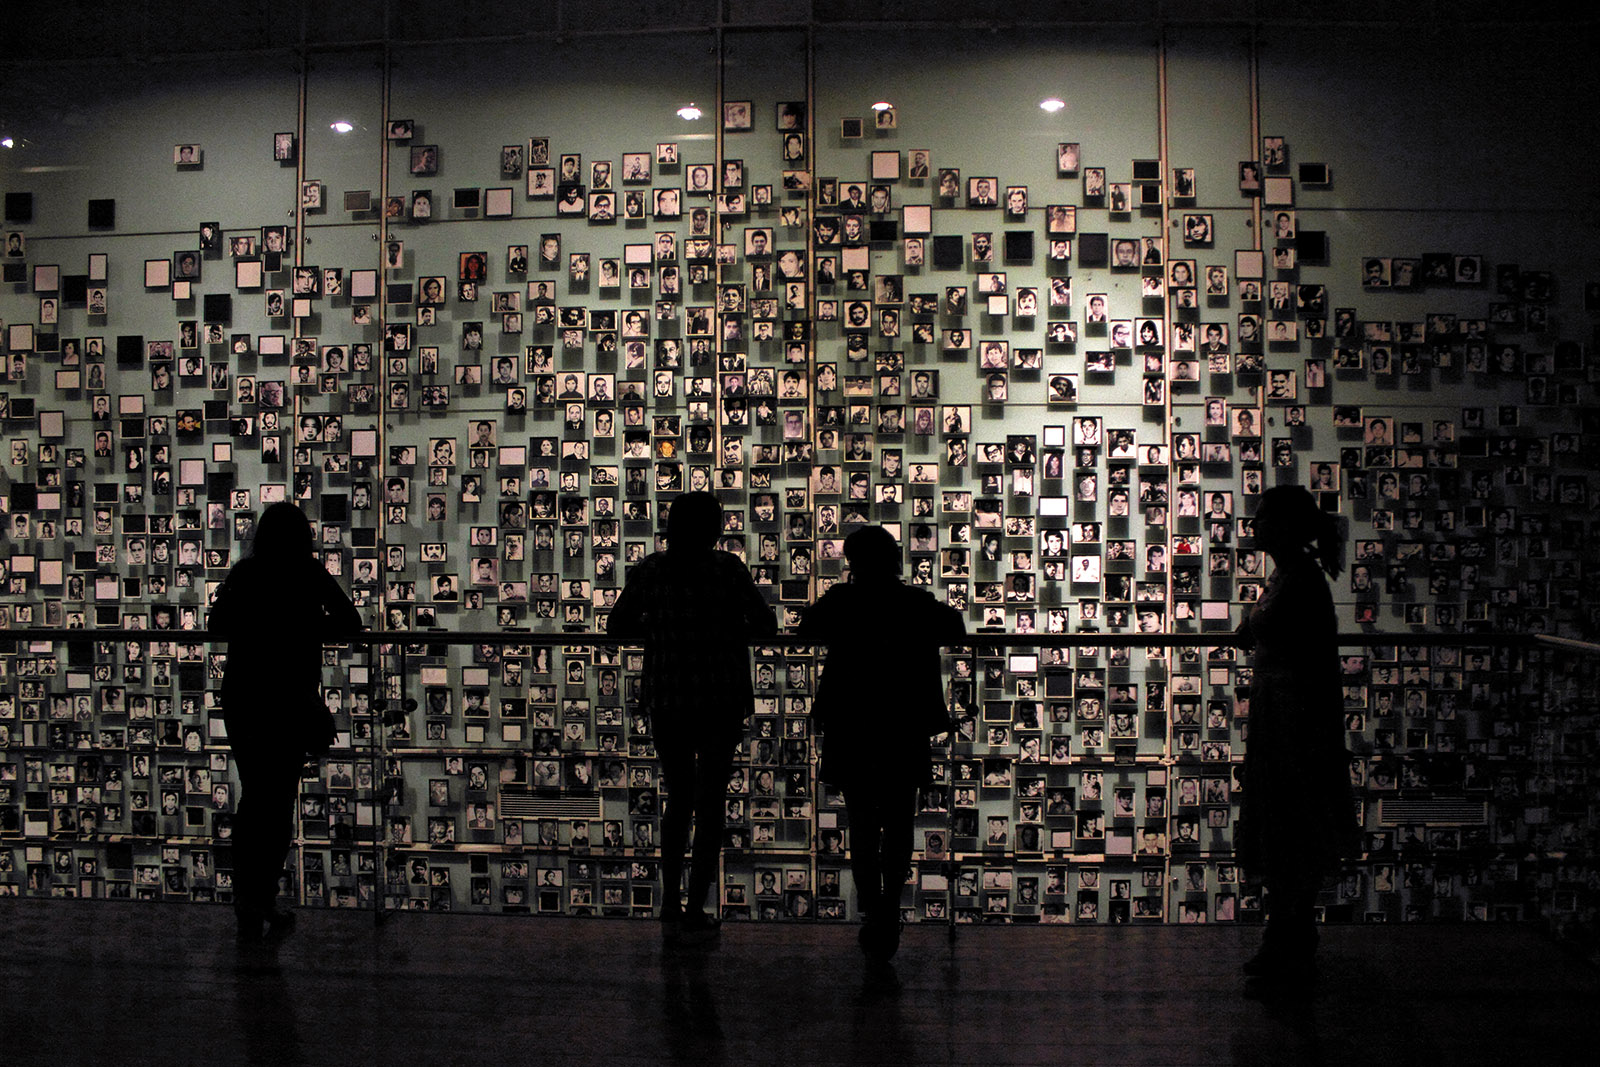 Photographs of Chileans who were executed under Pinochet’s military dictatorship, at the Museum of Memory and Human Rights in Santiago, which opened in 2010